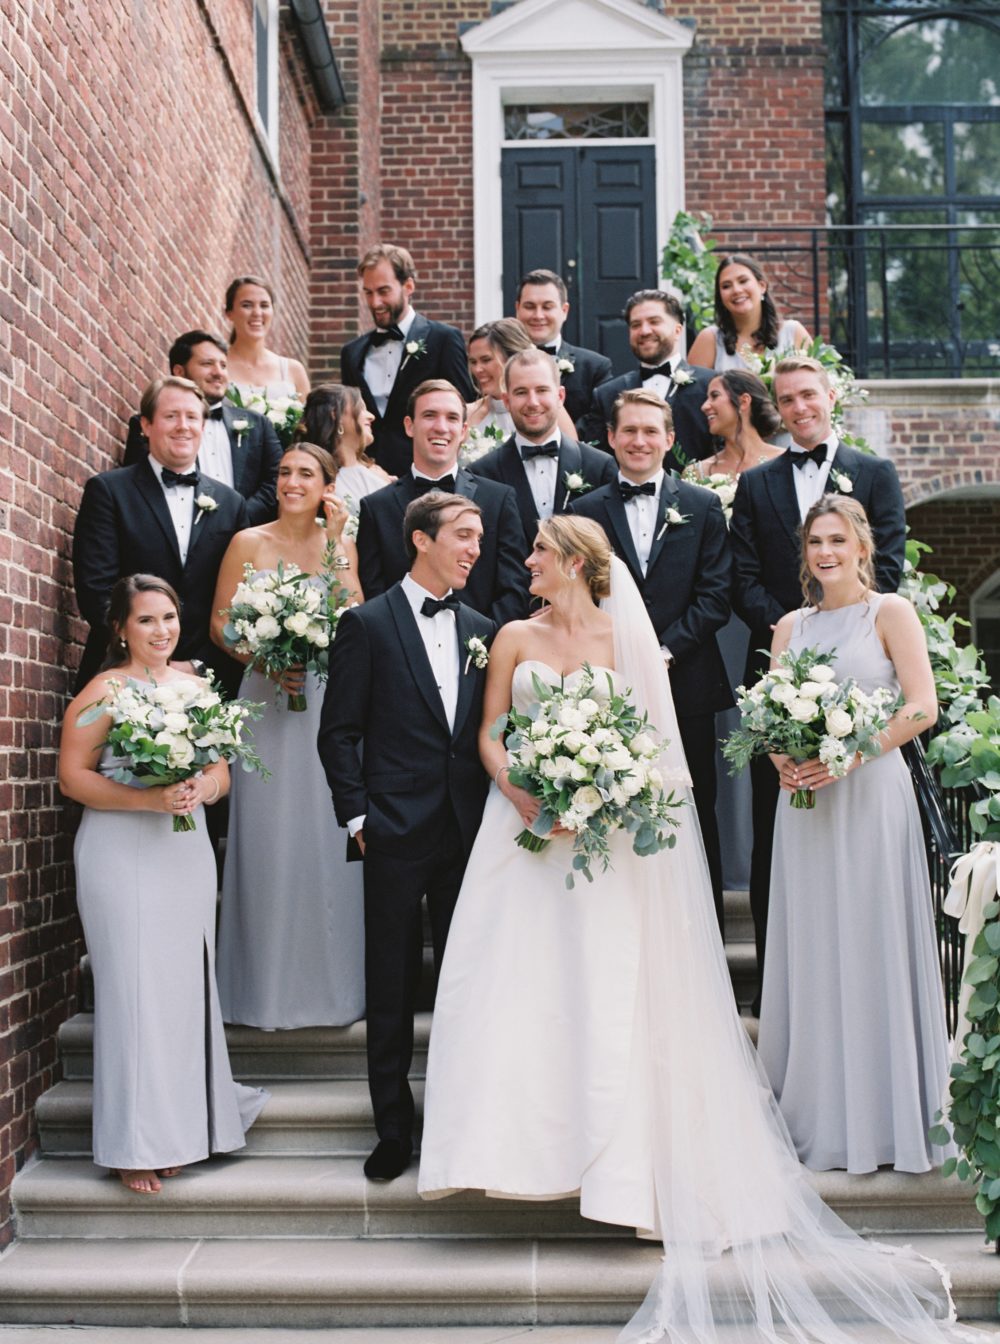 Timeless September Baltimore Country Club Roland Park wedding in Baltimore, Maryland.